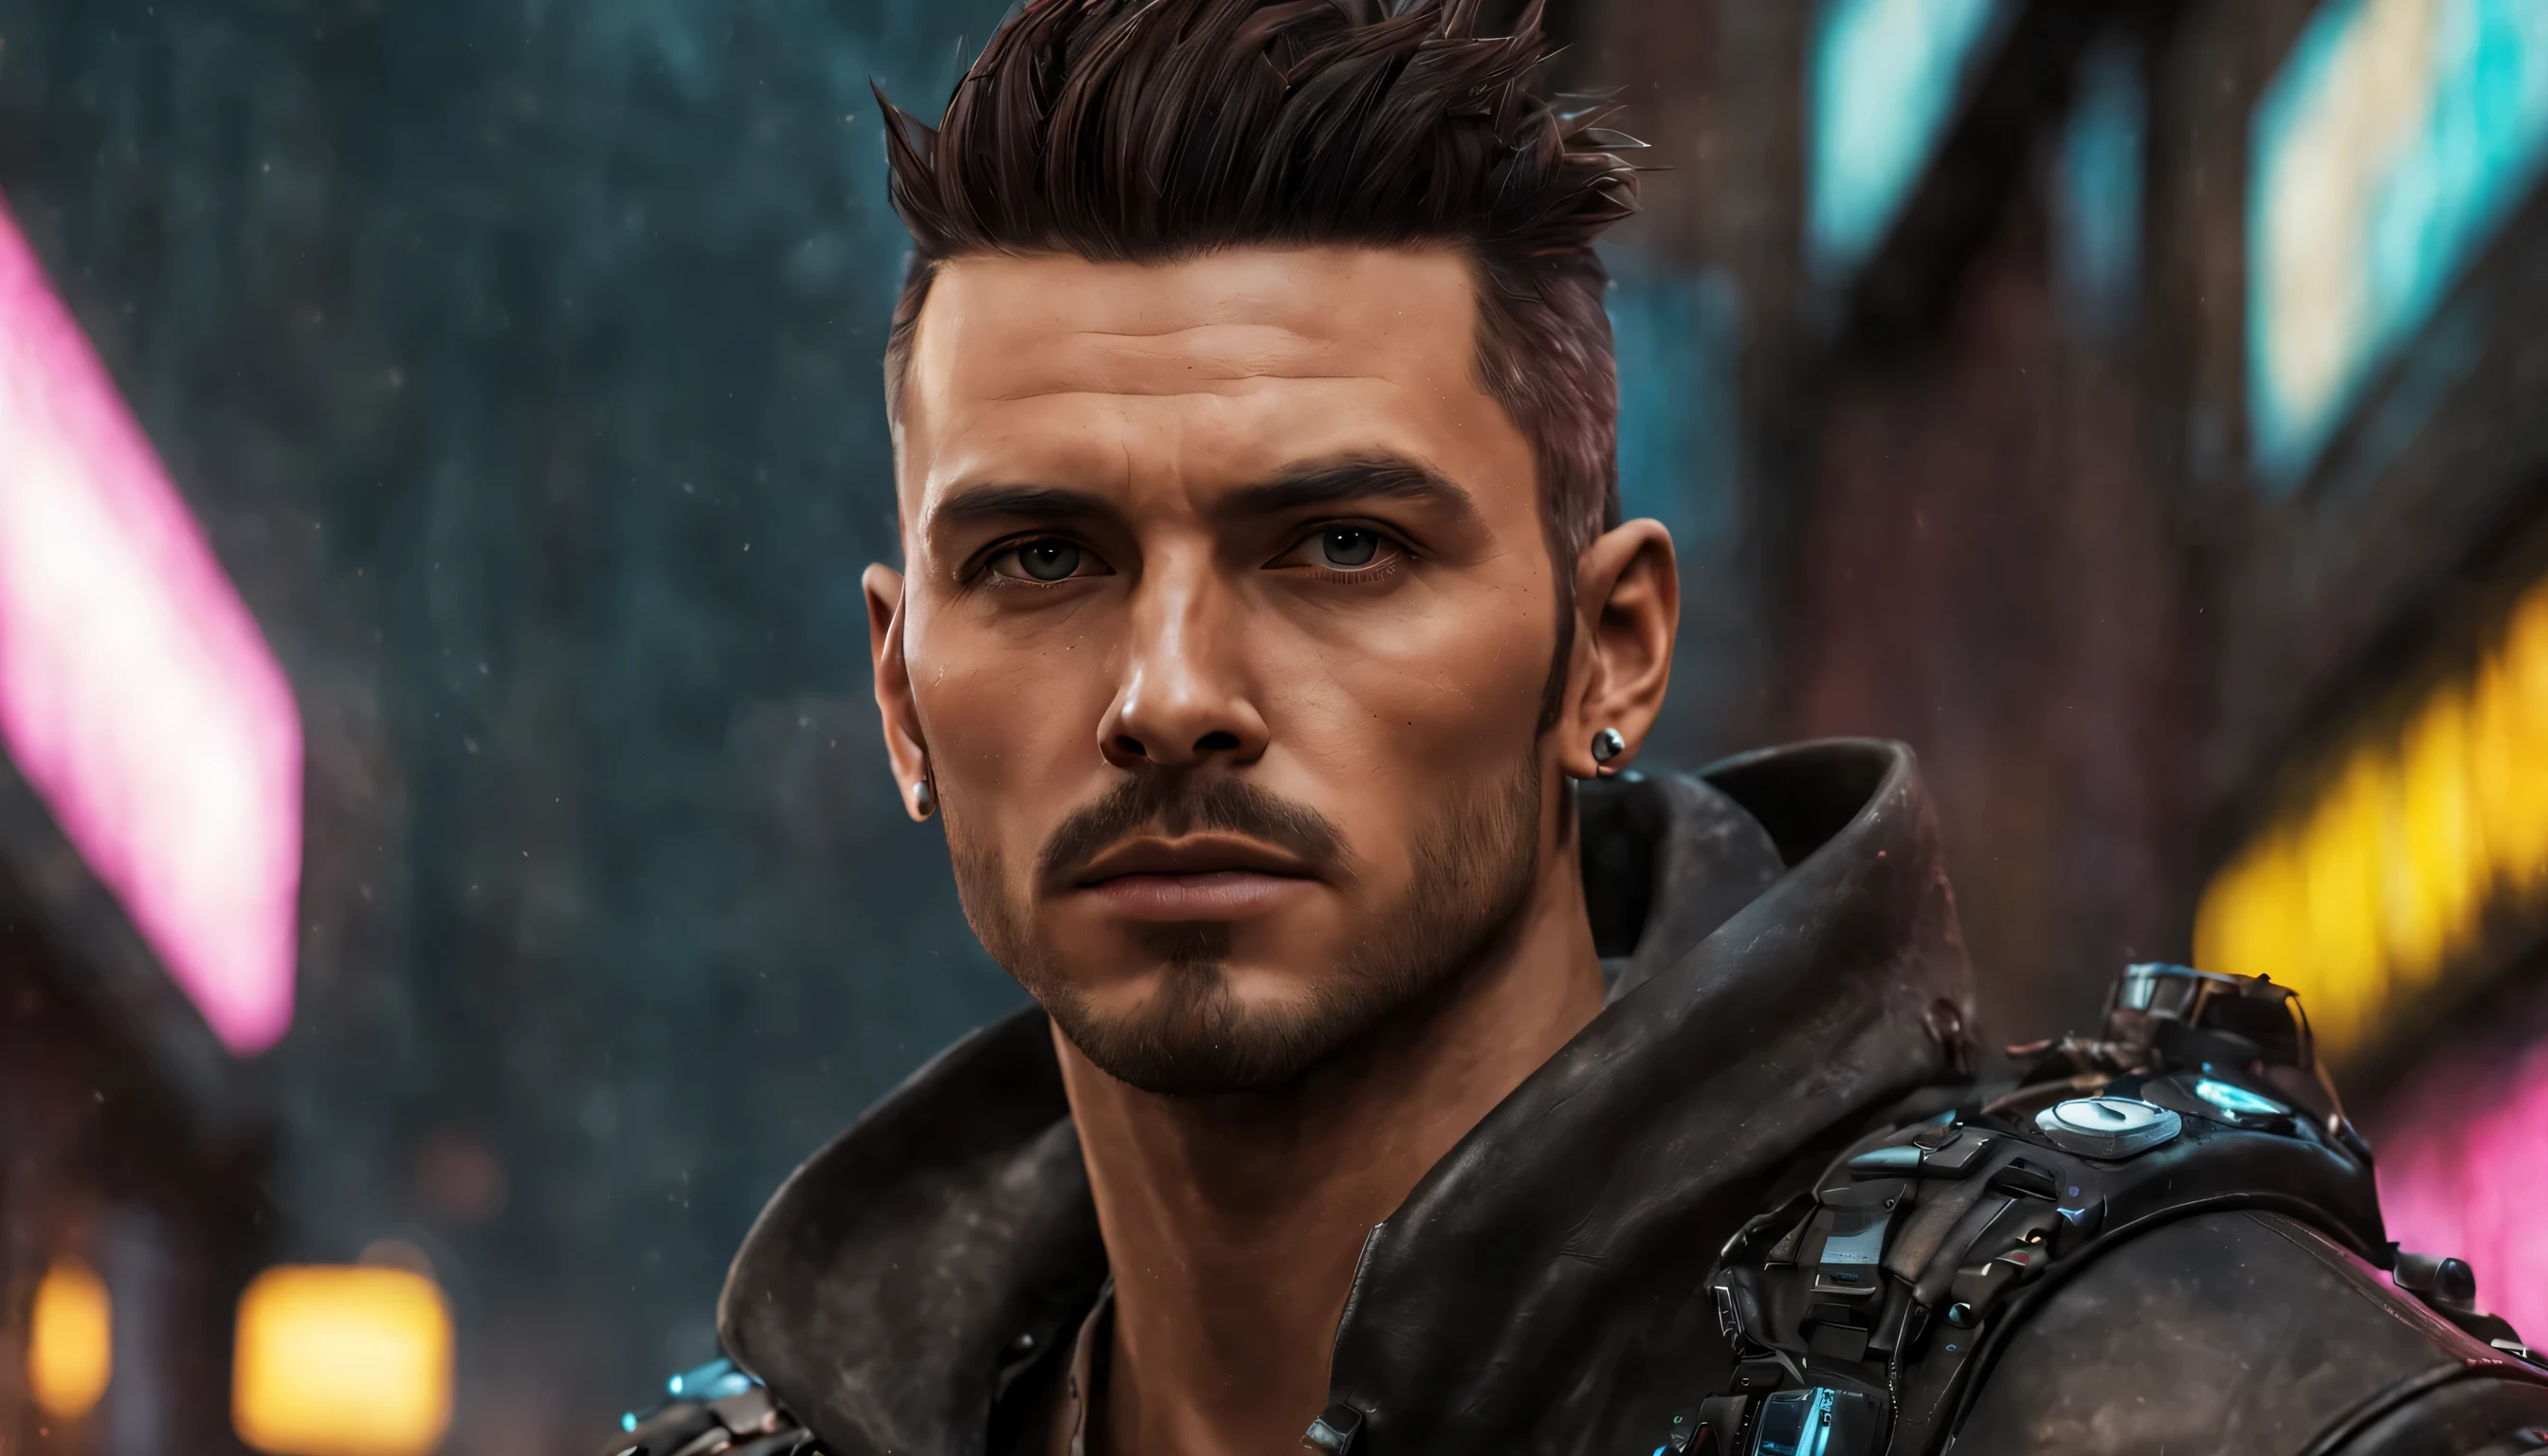 close-up portrait of a Backstreet Boys lookalike, Detailed character concept art, Inspired by, realisitic, fantasy character, unreal motor 5, RPG style, Trends on ArtStation, Quality of CGSociedade, background bokeh, softfocus, 35mm lens, complex leather texture, cyberpunk clothing, confident looking, artwork style, ((masterfully crafted clothes, expressive eyes, strong posture), professional photograpy, Dynamic Posture, High fidelity textures ), attractive colors, volumetric neon lightning, vivid neon lights, bright coloured, close photo at eye level, High definition, high fidelity effects, Octane rendering, nintendo art, Captura de tela inspirada em Infamous First Light e Cyberpunk 2077, cloused mouth, cinematic lighting, Photo at eye level, canon, Sony FE, Fujifilm, Nikon, Sony FE GM, Depth of field, cinematic lighting, reflection light, Ray tracing, moderno, Futurism, super detaill, High details, high qualiy, awardwinning, best qualityer, high resolution, 1080P, High definition, 4K, 8K, 16K, texturized skin, anatomically correcte, precise, UHigh definition